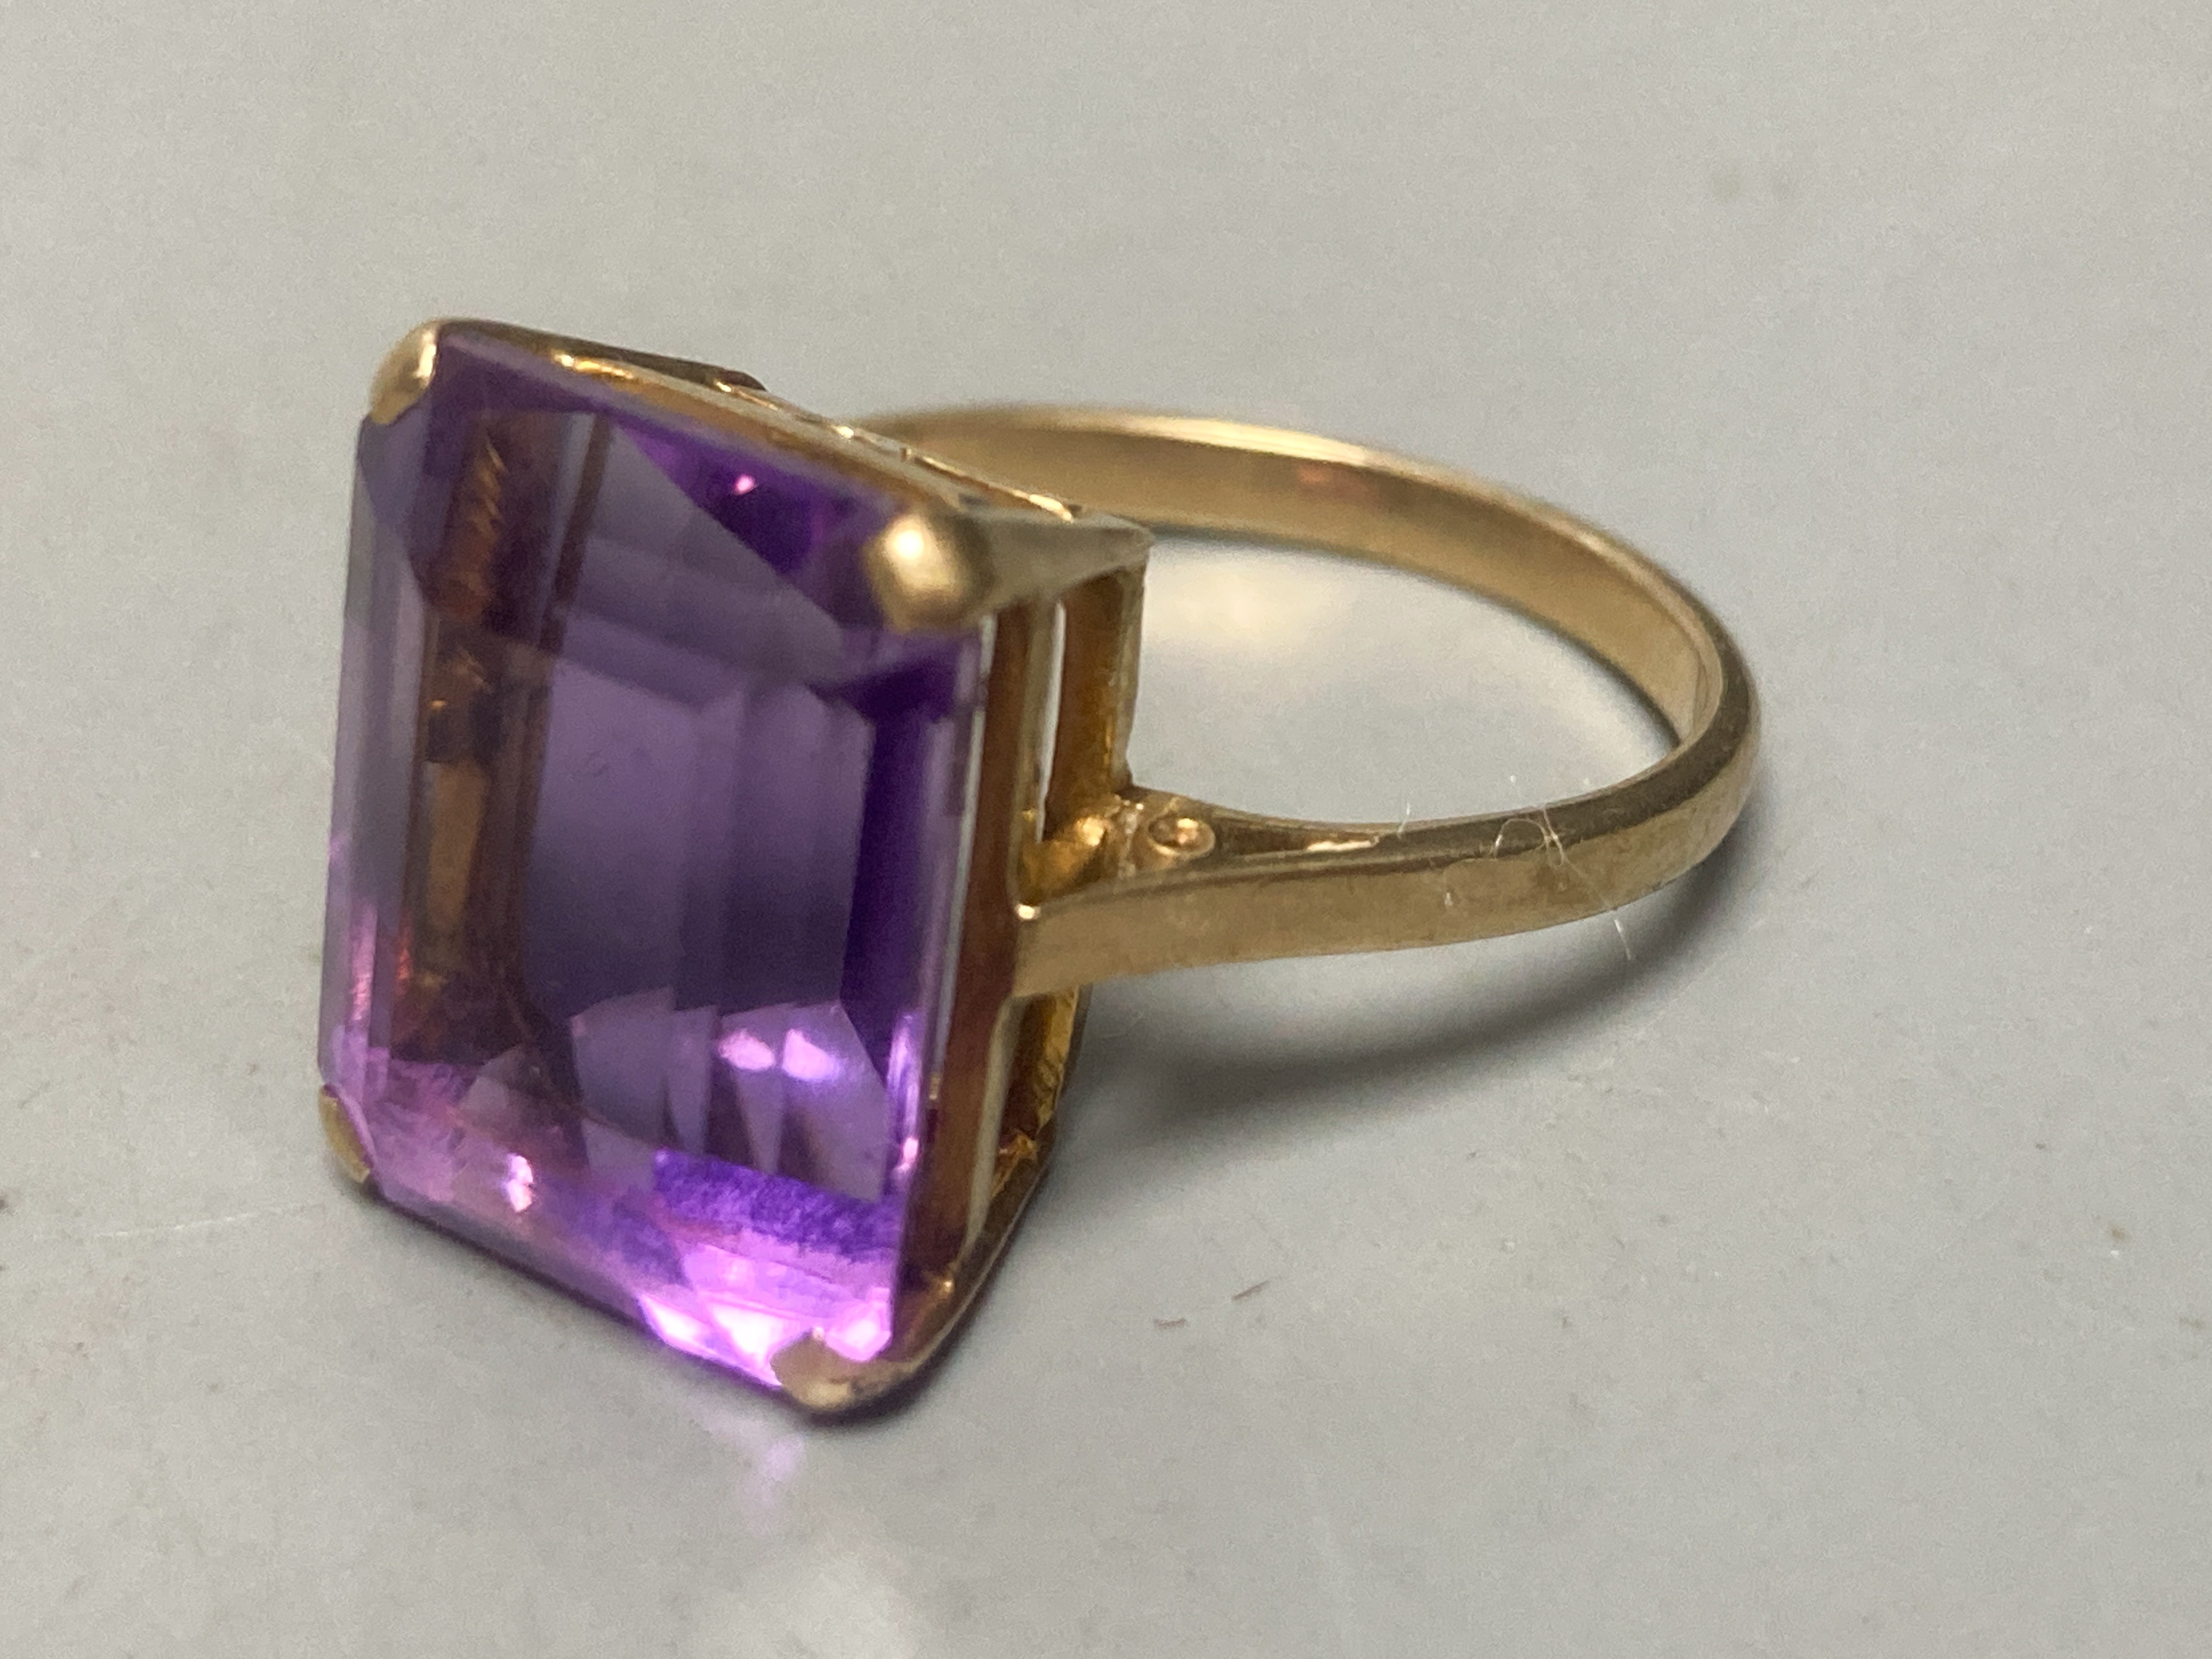 A Victorian 15ct gold buckle ring, size P/Q, 4.2 grams, three yellow metal and gem set dress rings, including amethyst, citrine and green tourmaline, gross 21.1 grams, an 18k deity pendant, 3.1 grams and a white metal an